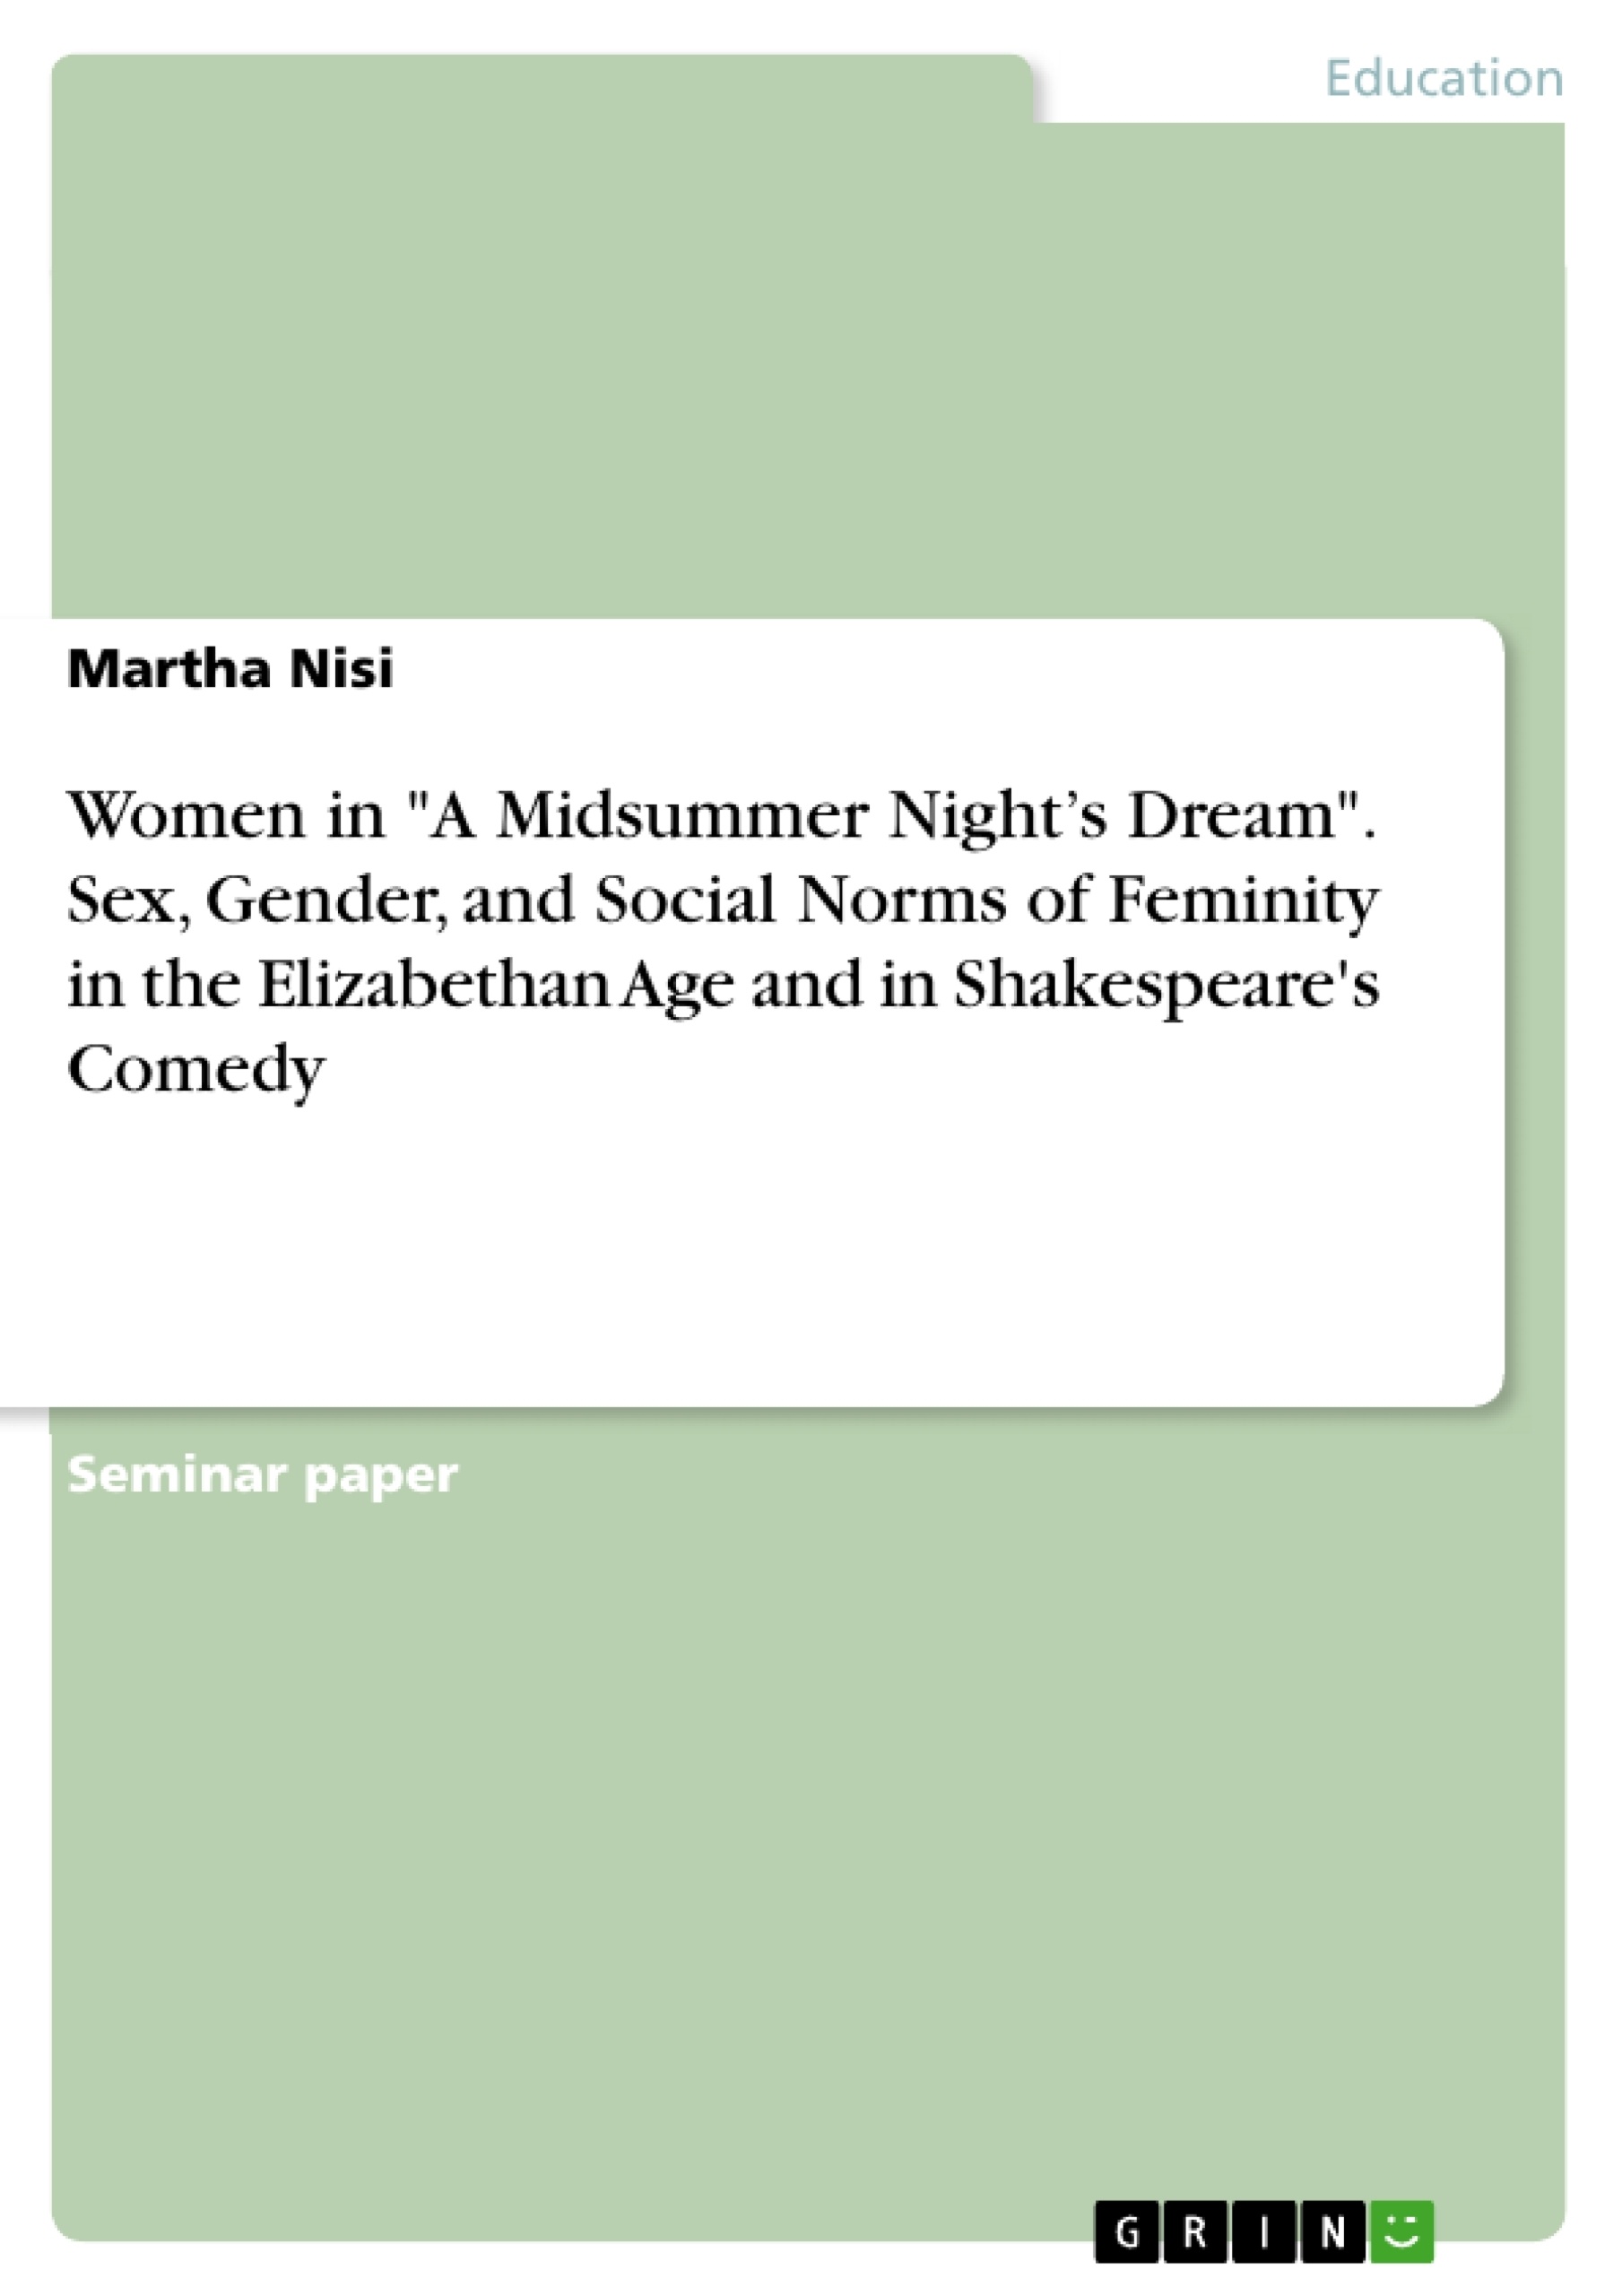 Title: Women in "A Midsummer Night’s Dream". Sex, Gender, and Social Norms of Feminity in the Elizabethan Age and in Shakespeare's Comedy